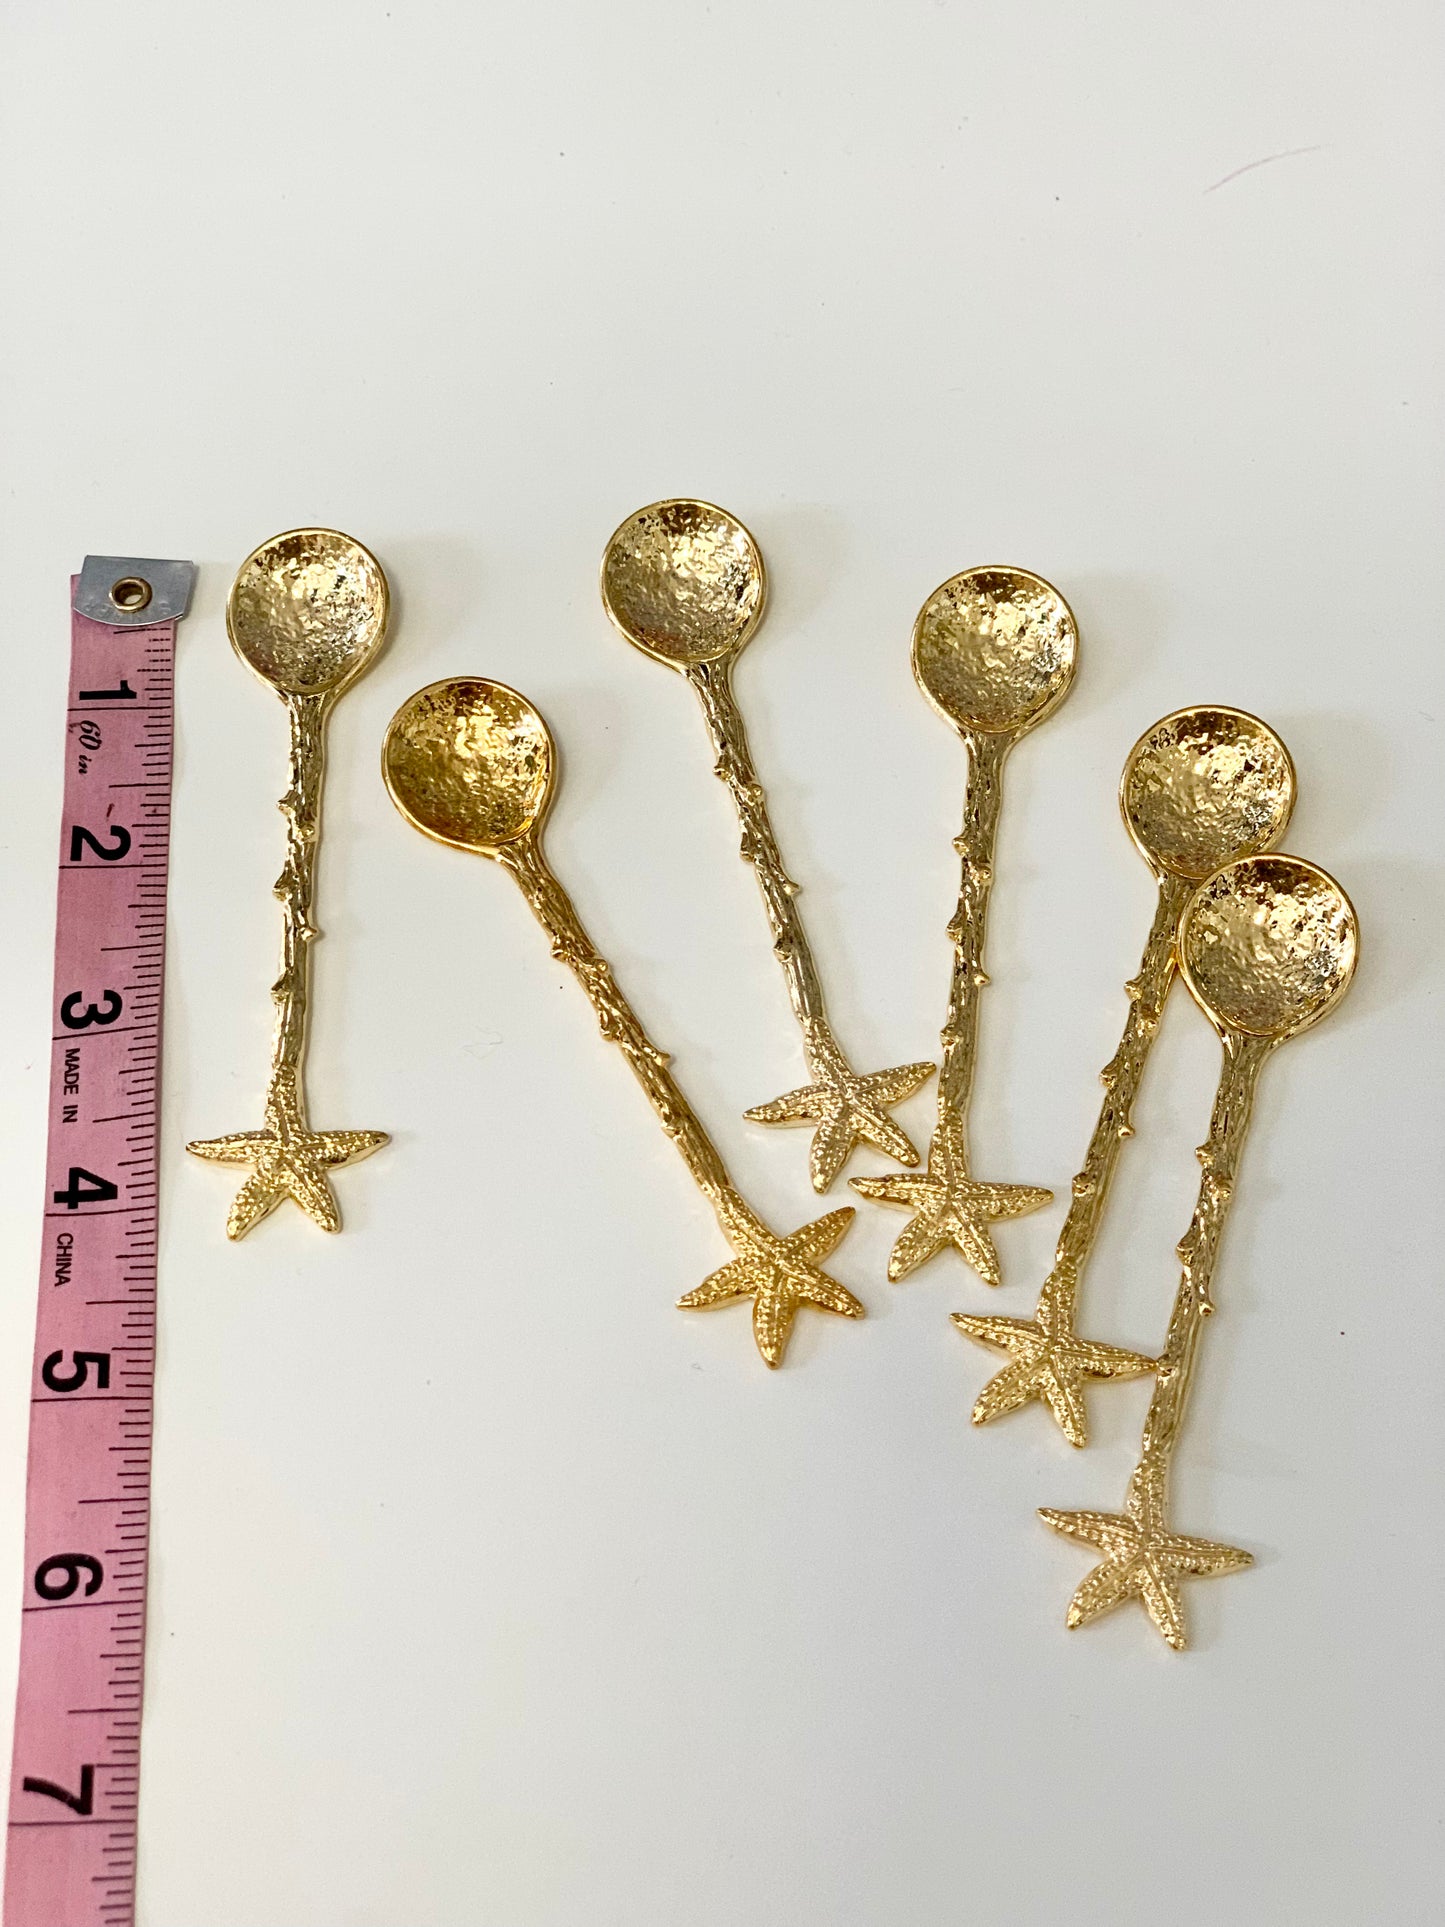 One Gold Spoon with star fish